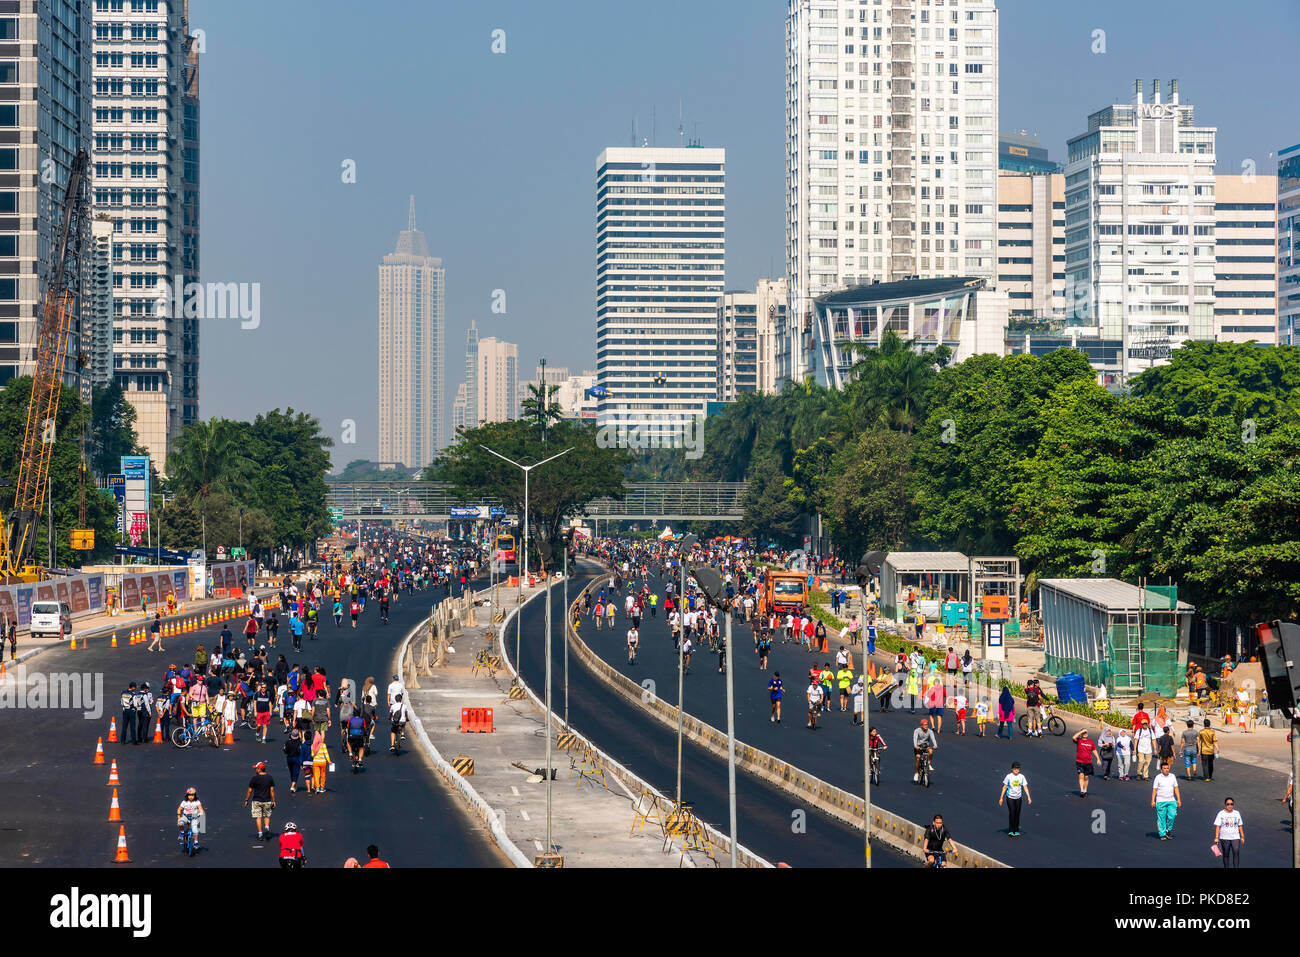 People enjoying the street during the car free day held every Sunday morning, Jakarta, Indonesia Stock Photo